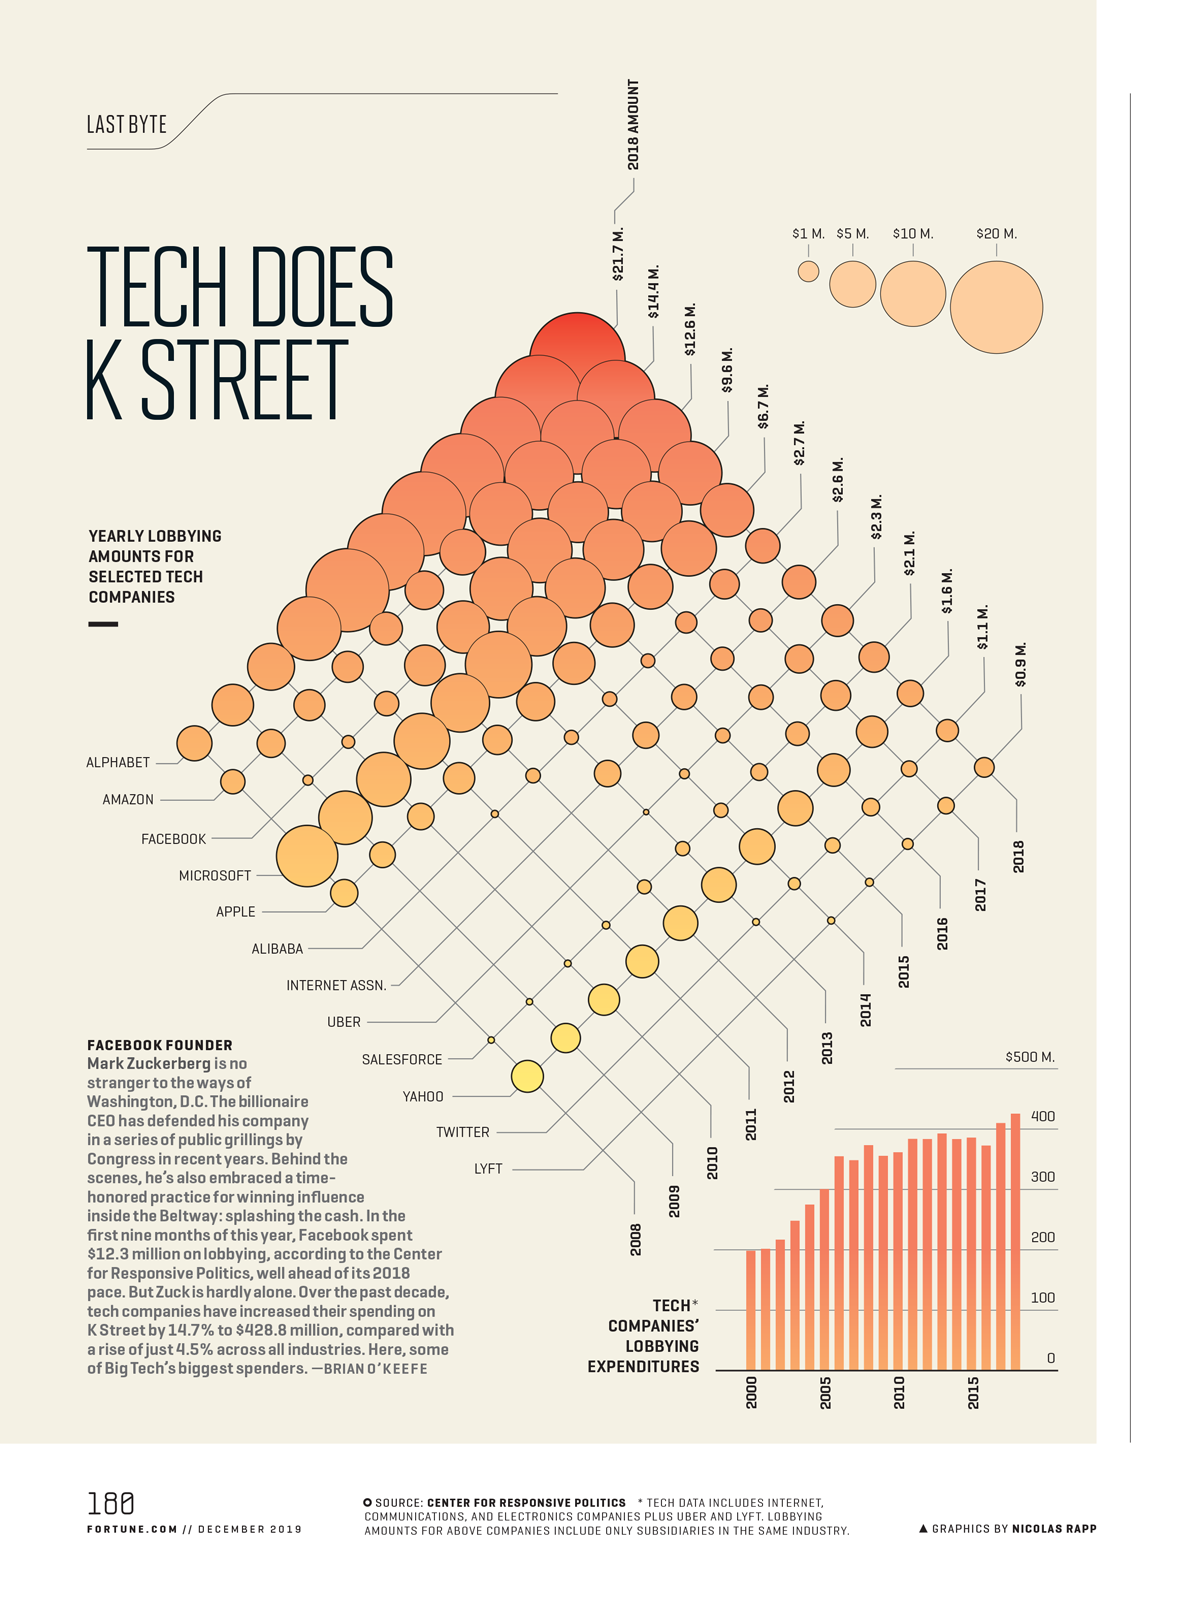 Infographic shows lobbying expenses by tech companies